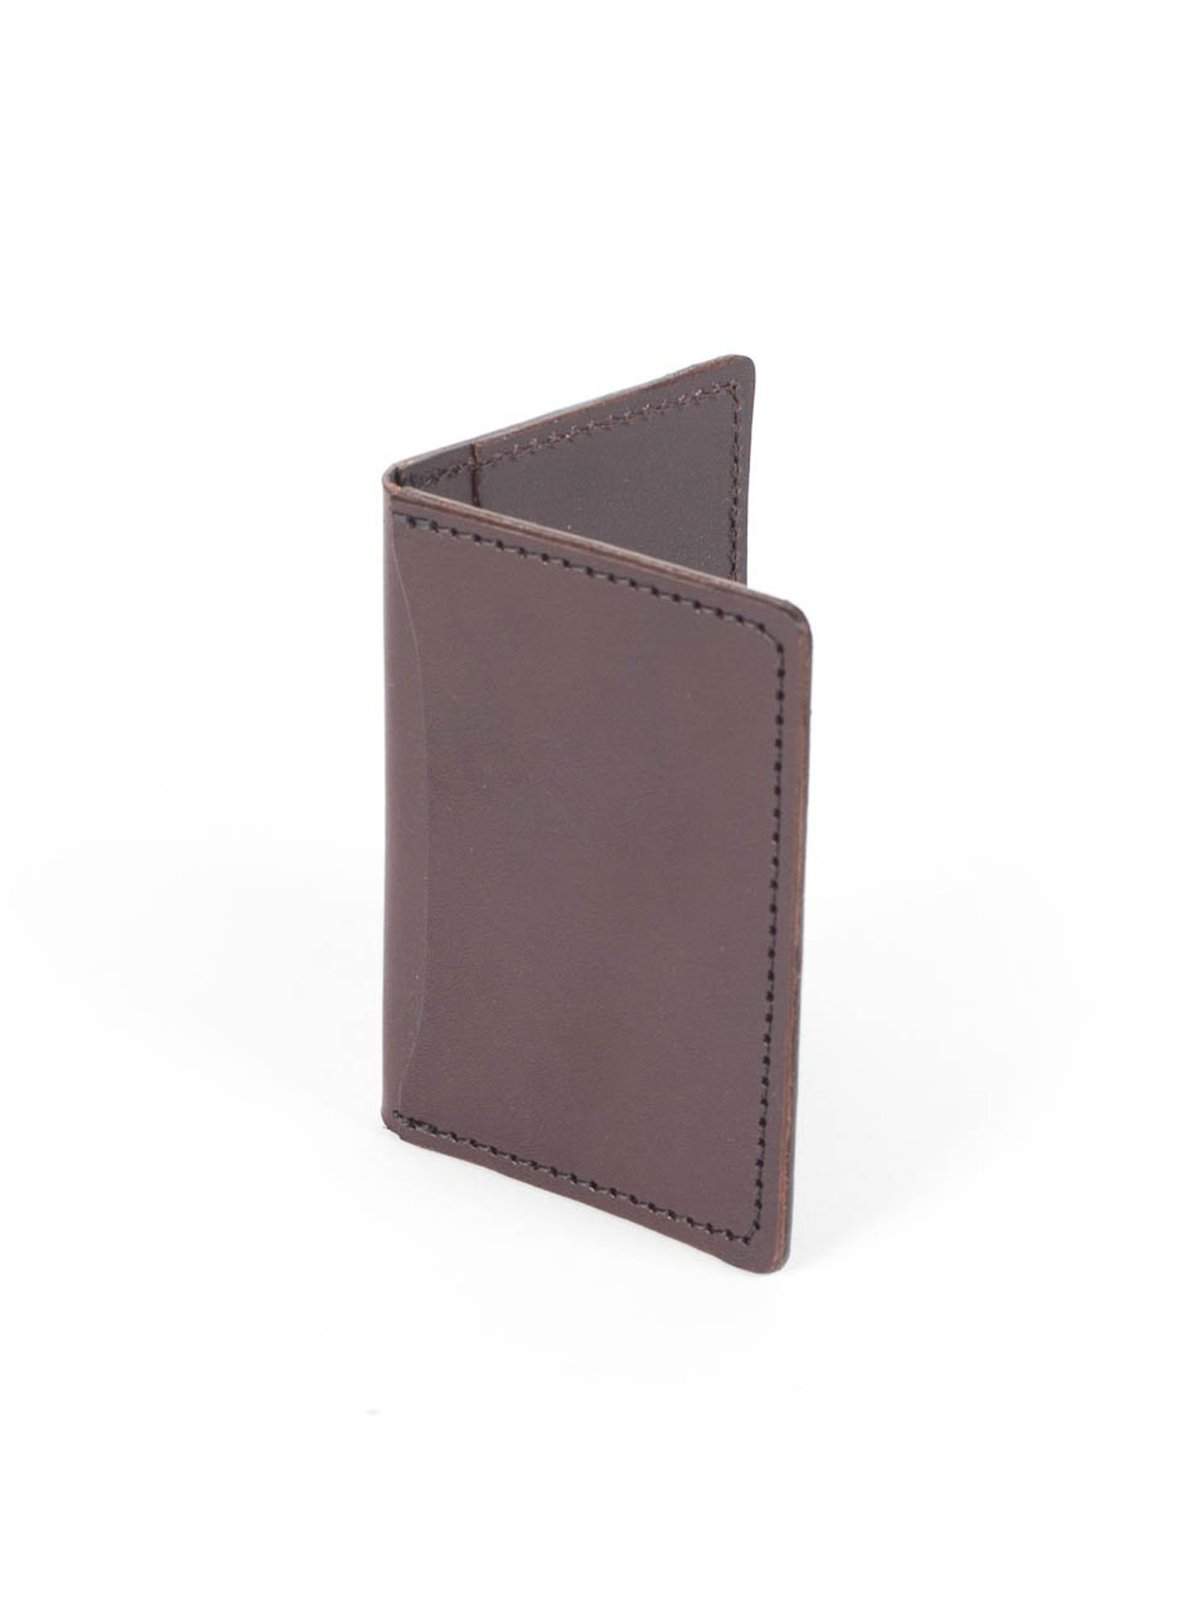 Wood&amp;Faulk Front Pocket Brown Chromexcel Wallet - MORE by Morello Indonesia